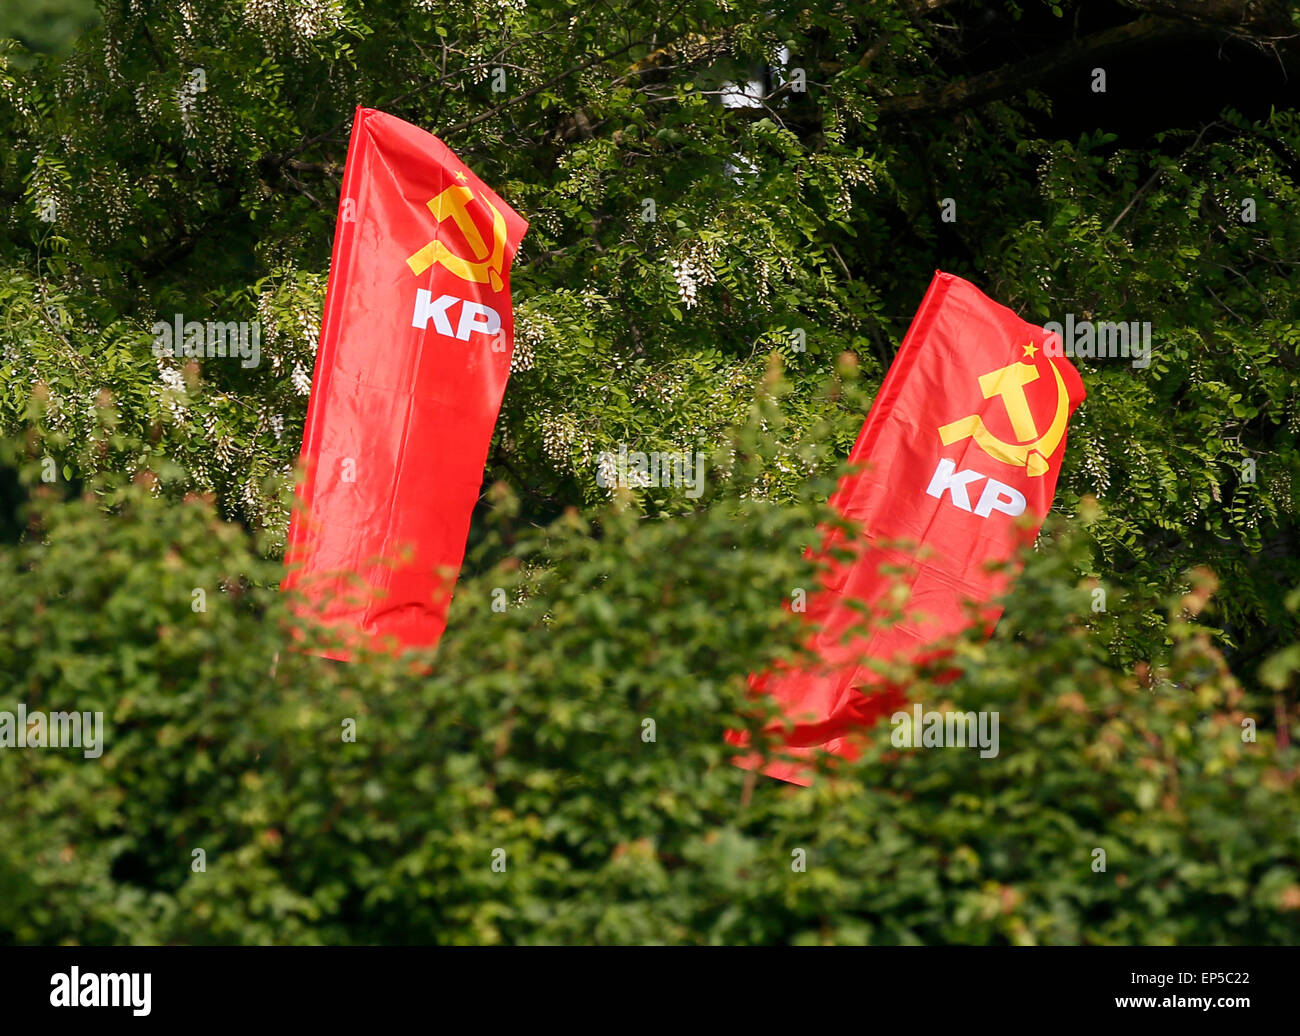 Flags of the KP wave during a demonstration against an event with the Turkish President Recep Tayyip Erdogan in Karlsruhe, Germany, 10 May 2015. Several people were injured in clashes between supporters and opponents of President Recep Tayyip Erdogan ahead of a visit by the Turkish head of state to the German city of Karlsruhe. The controversial visit is being billed as a meeting with youth groups but is widely seen as a campaign stop ahead of parliamentary elections due in Turkey on 07 June. According to organizers, 14,000 people have gathered for the event, with 3,000 waiting to be admitted Stock Photo